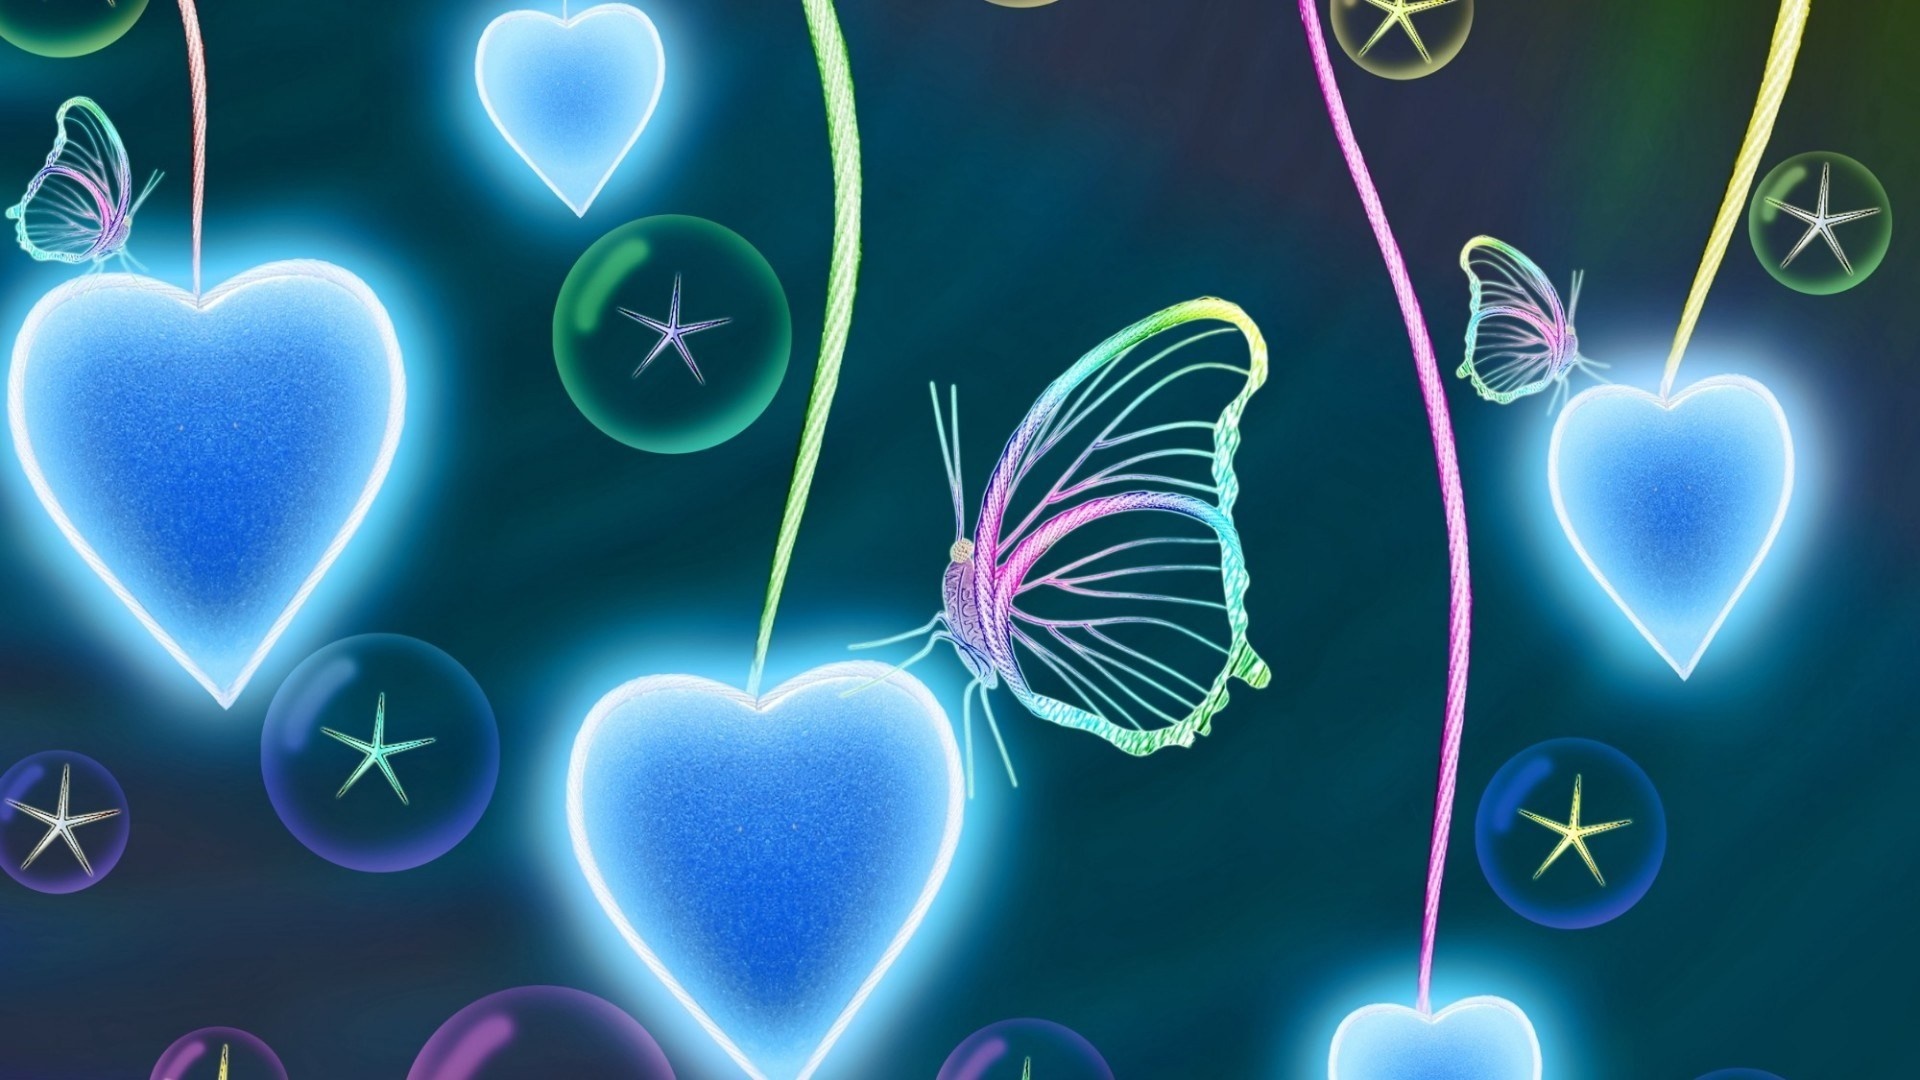 Butterfly hd background